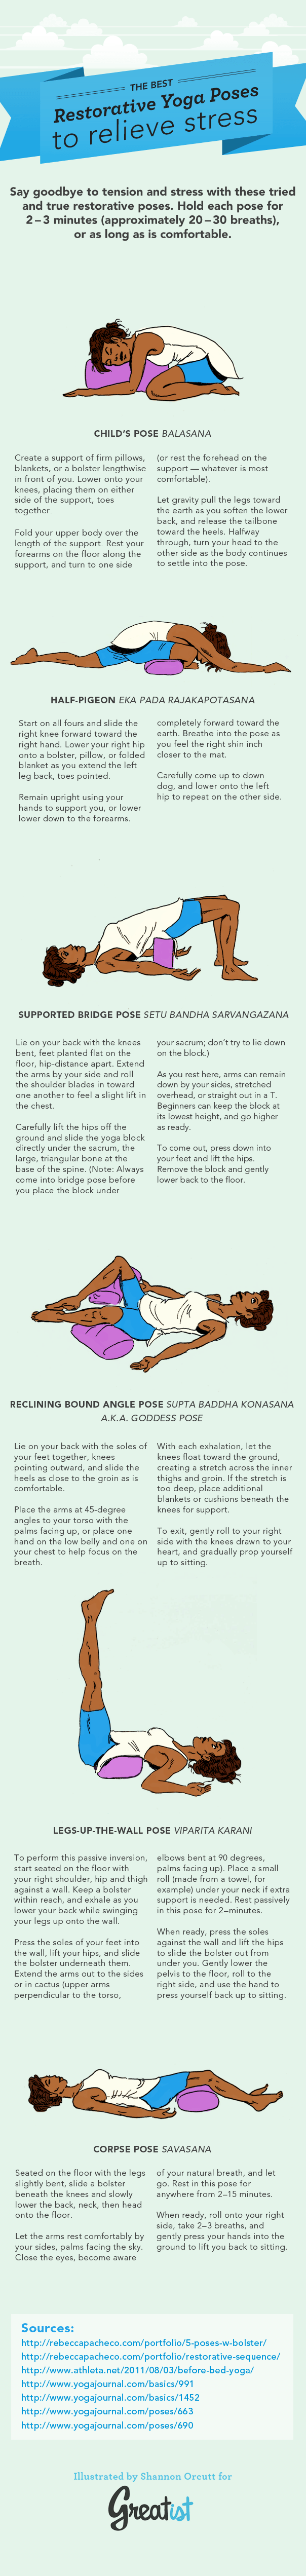 The Best Restorative Yoga Poses For Stress Relief